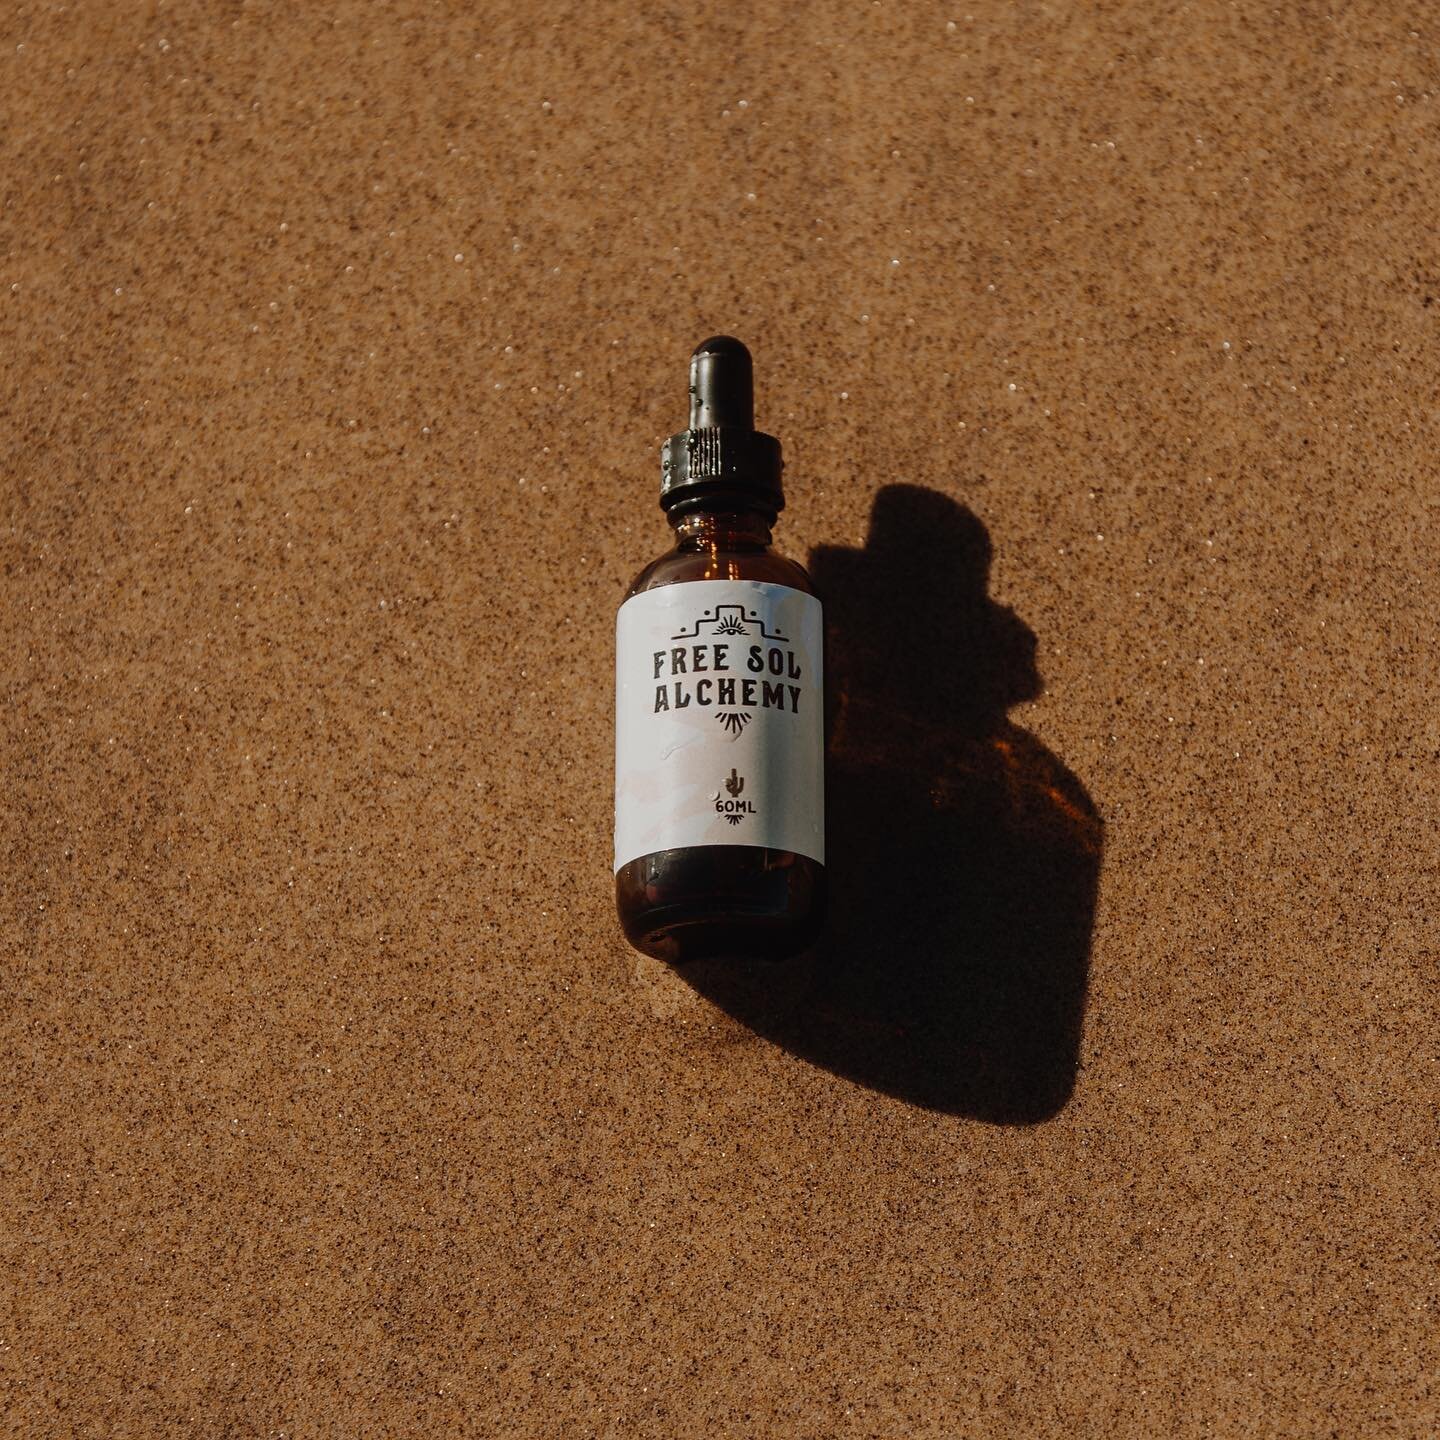 🌺 Summer Custom Serum 🌺 I&rsquo;m offering a limited edition 30 ml custom serum for $38 ✨ I will blend you a custom serum to support your skin through the summer months. The ingredients are all high quality, plant derived oils to support your skins